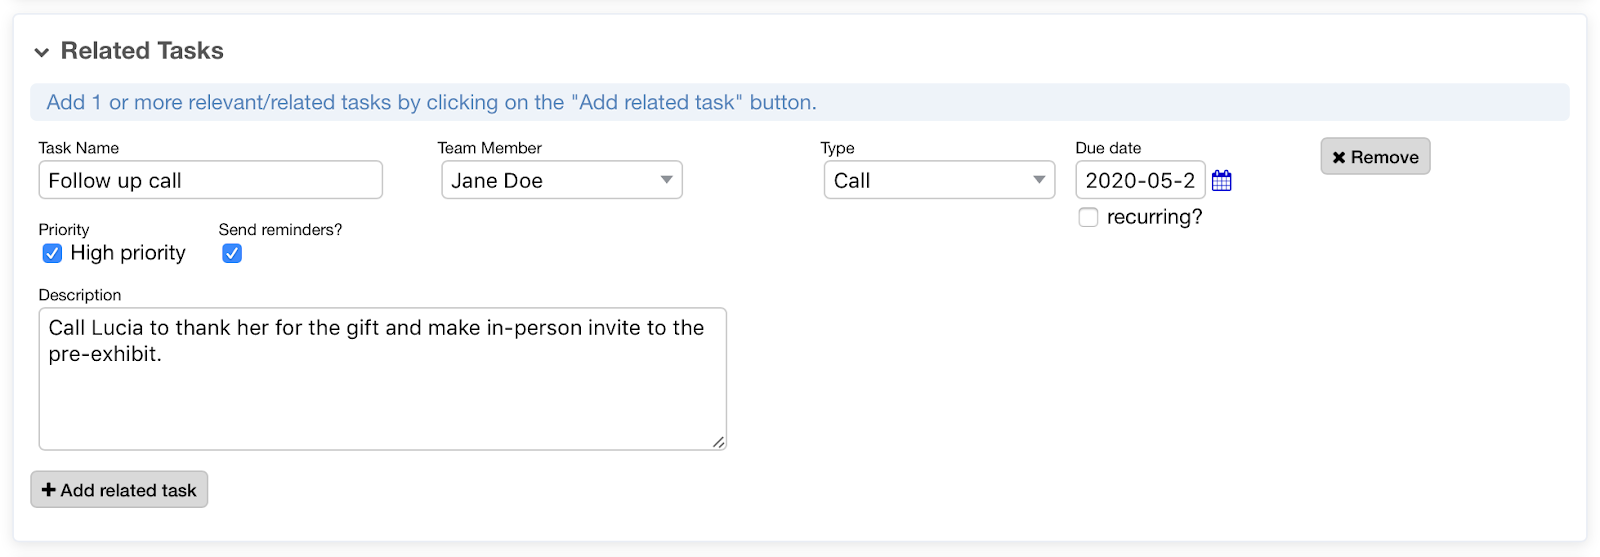 Adding a related task in LGL